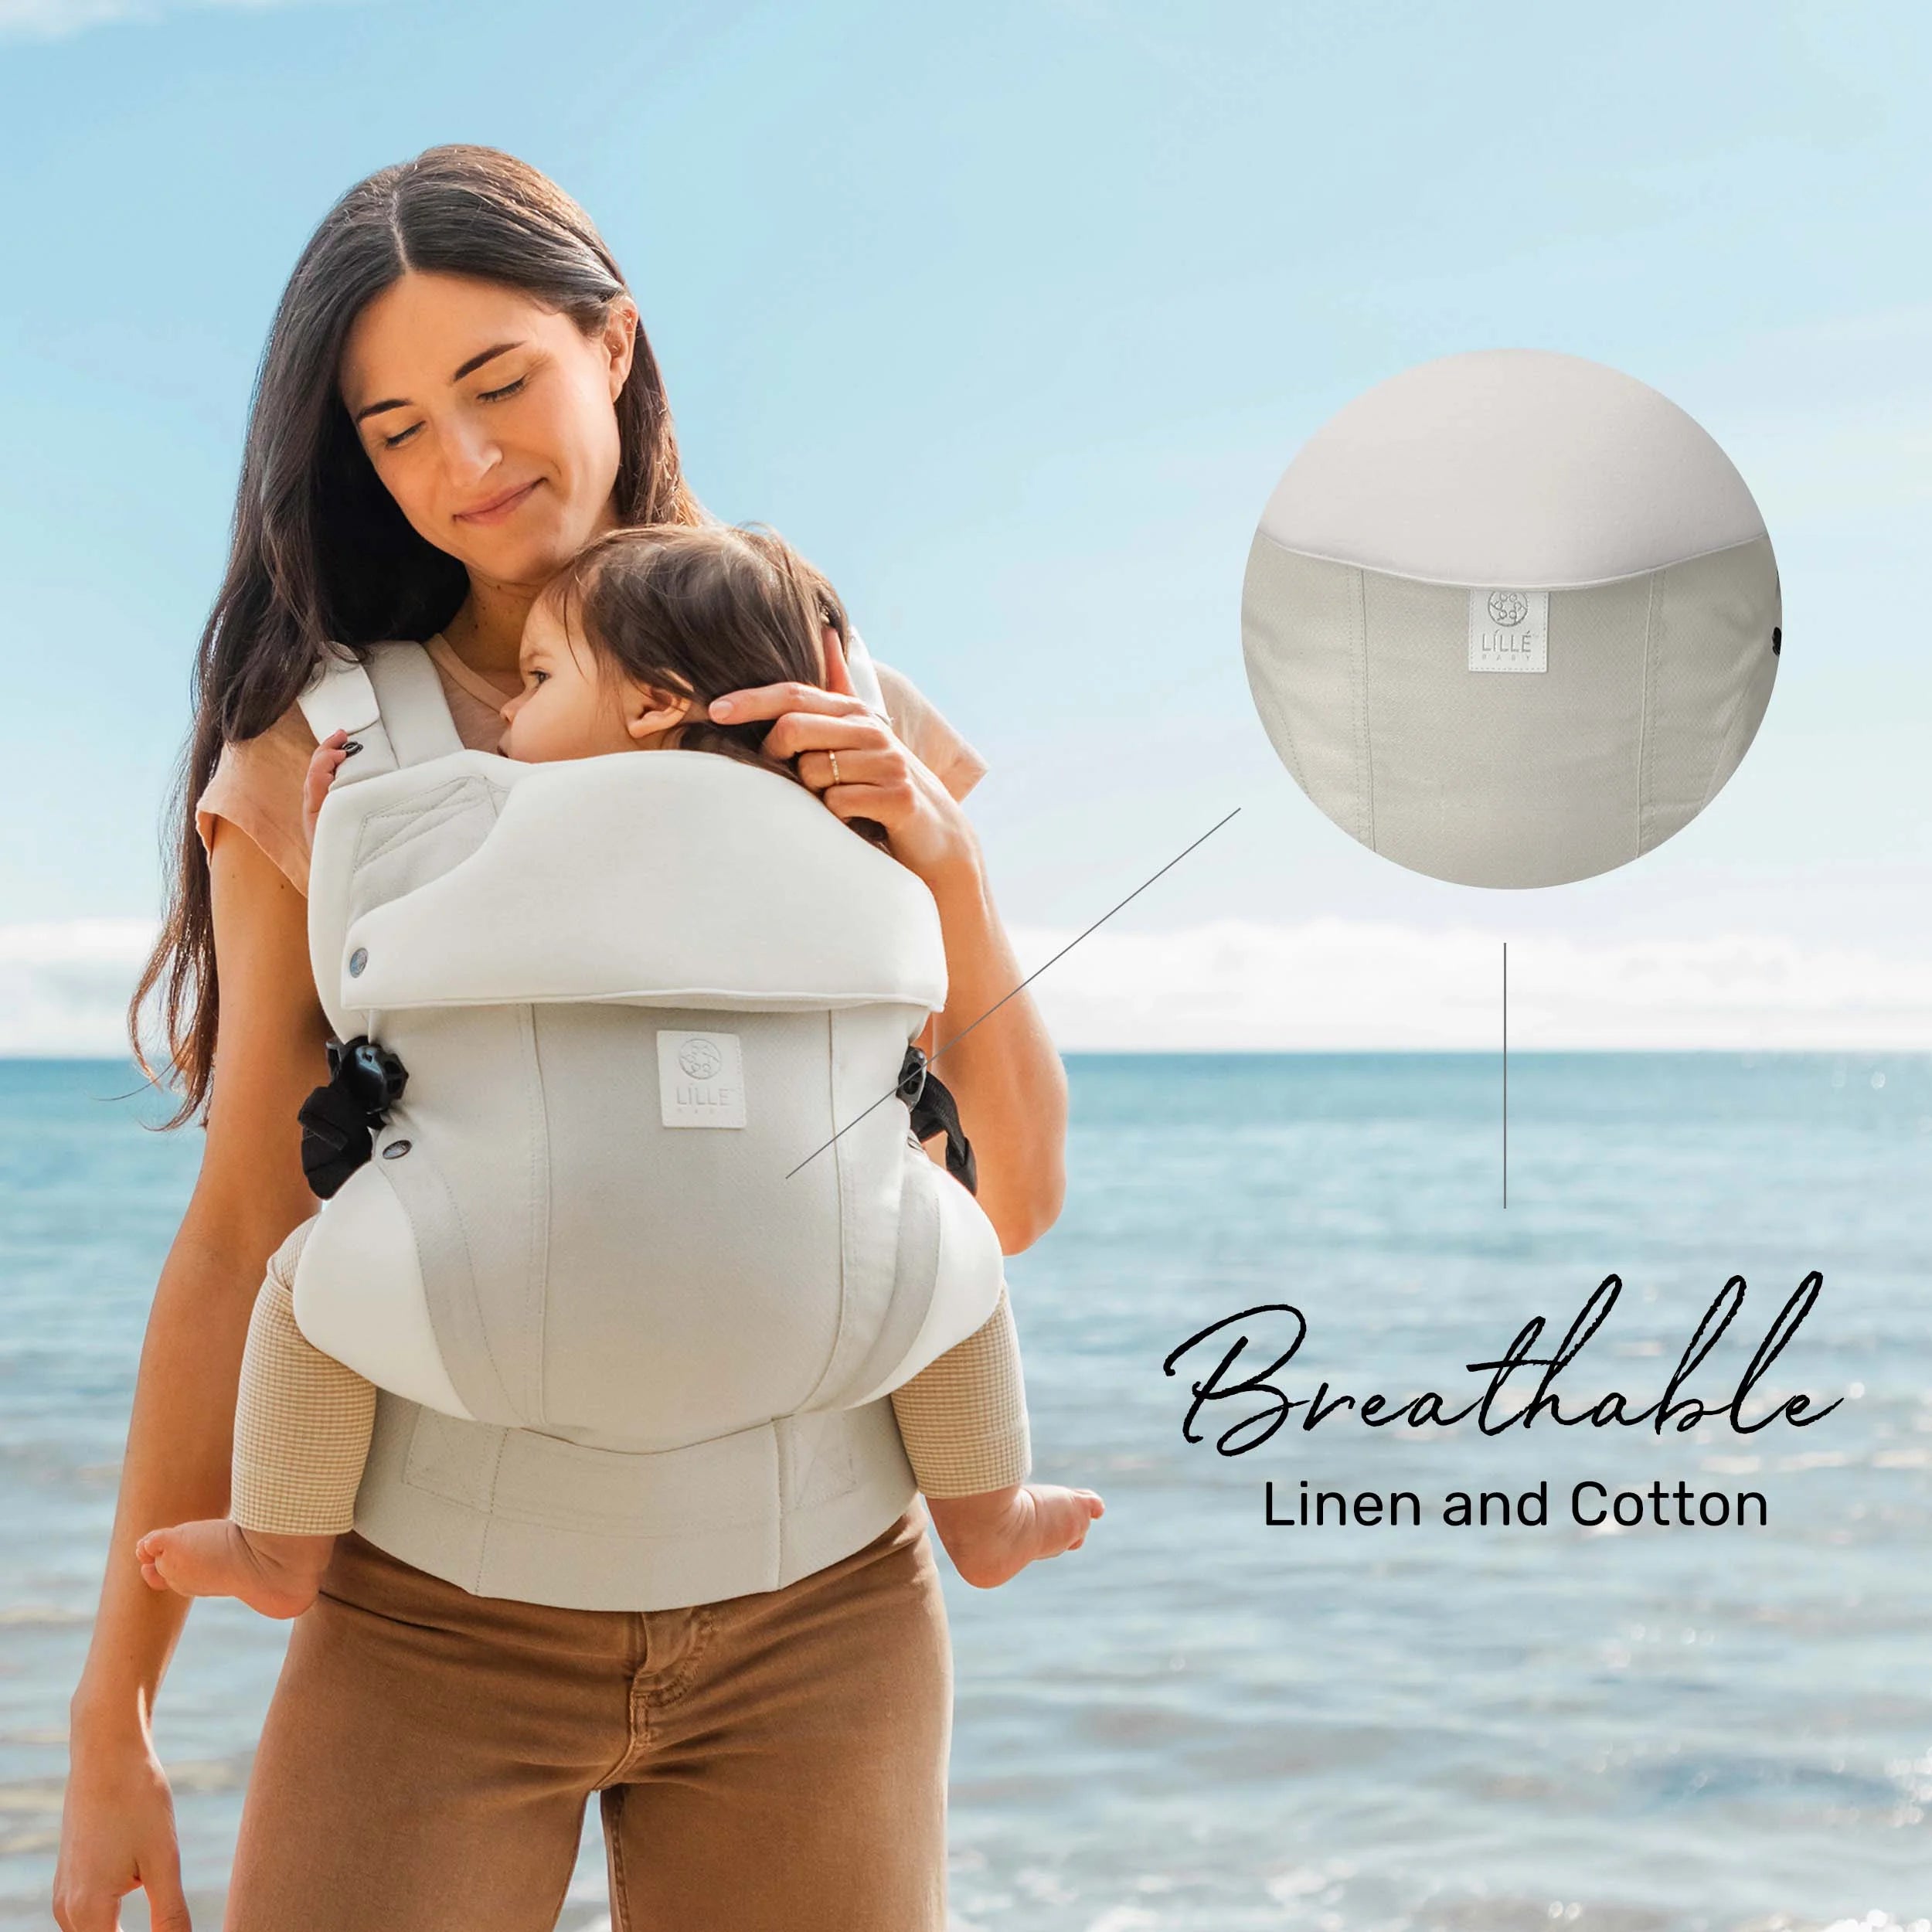 Elevate carrier images shows carrier support for baby. Ergonomic, hip healthy and endorsed by international hip dysplasia institute.